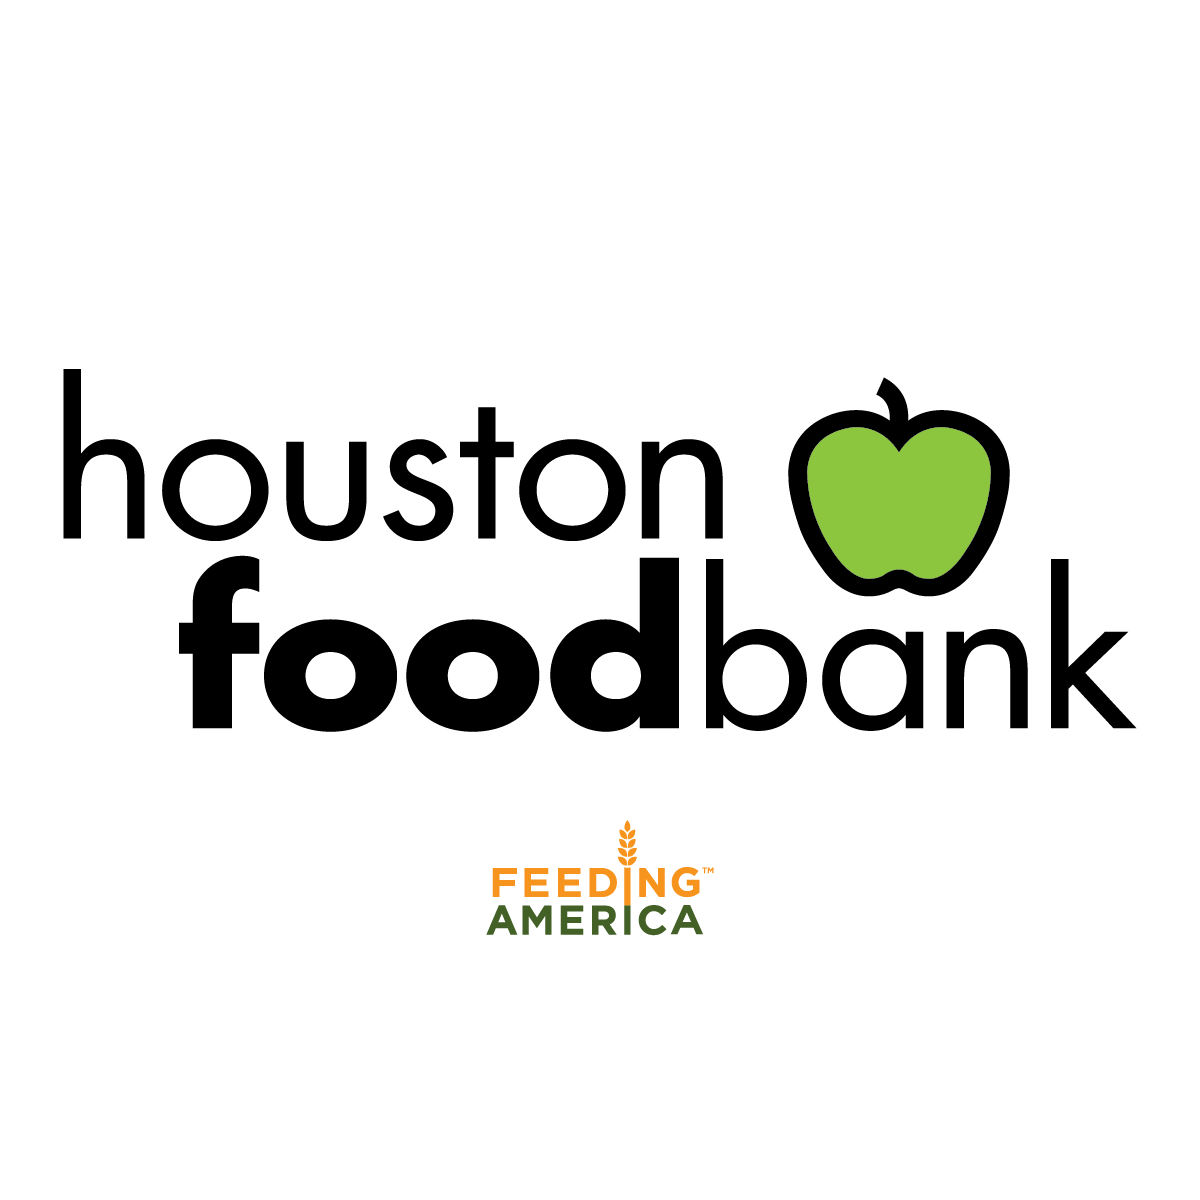 A poster made by the Houston Food Bank.